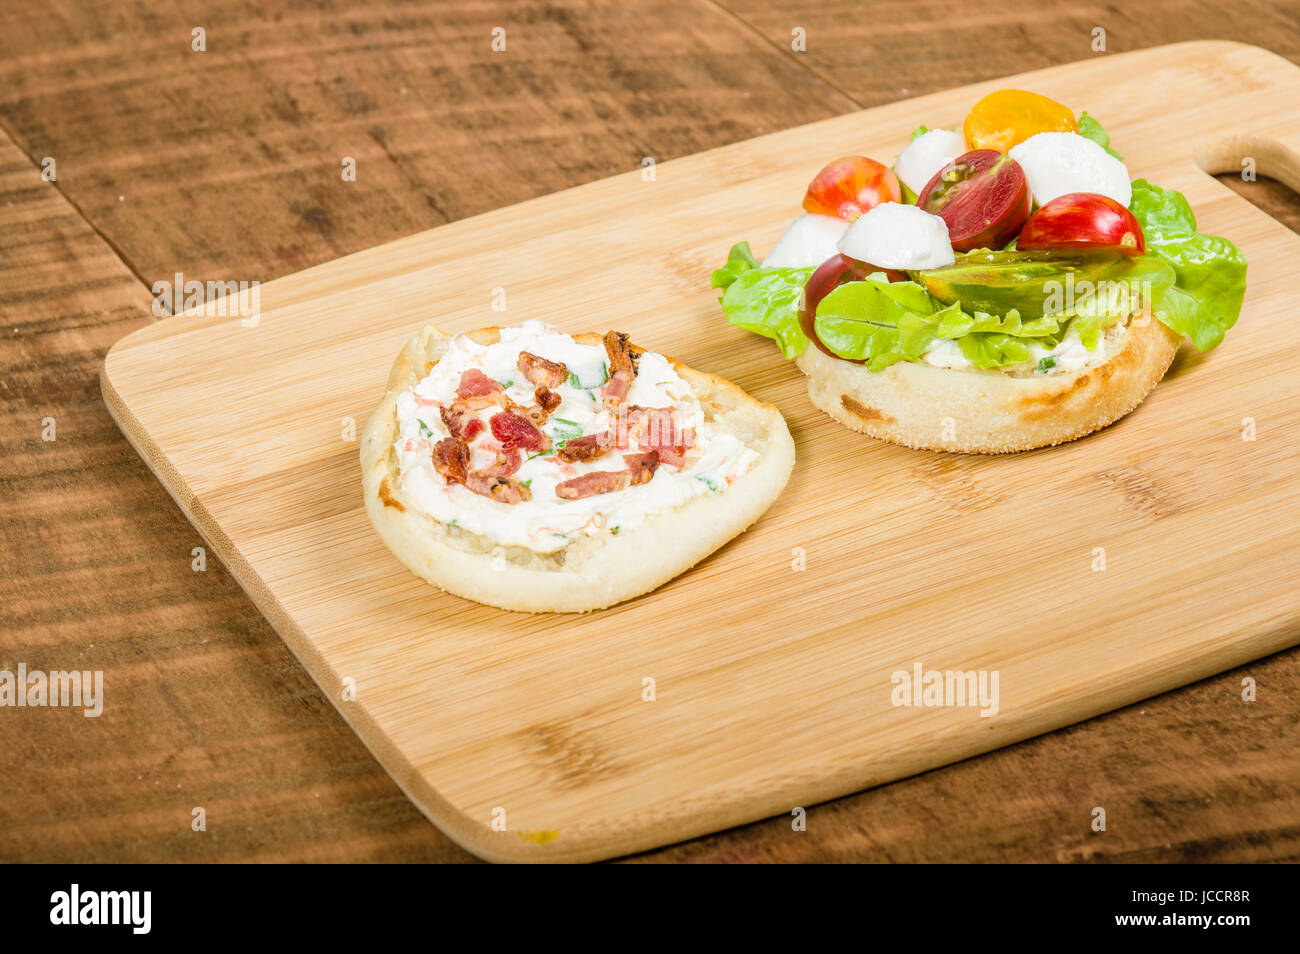 English muffin sandwich with cream cheese and heirloom tomatoes Stock Photo